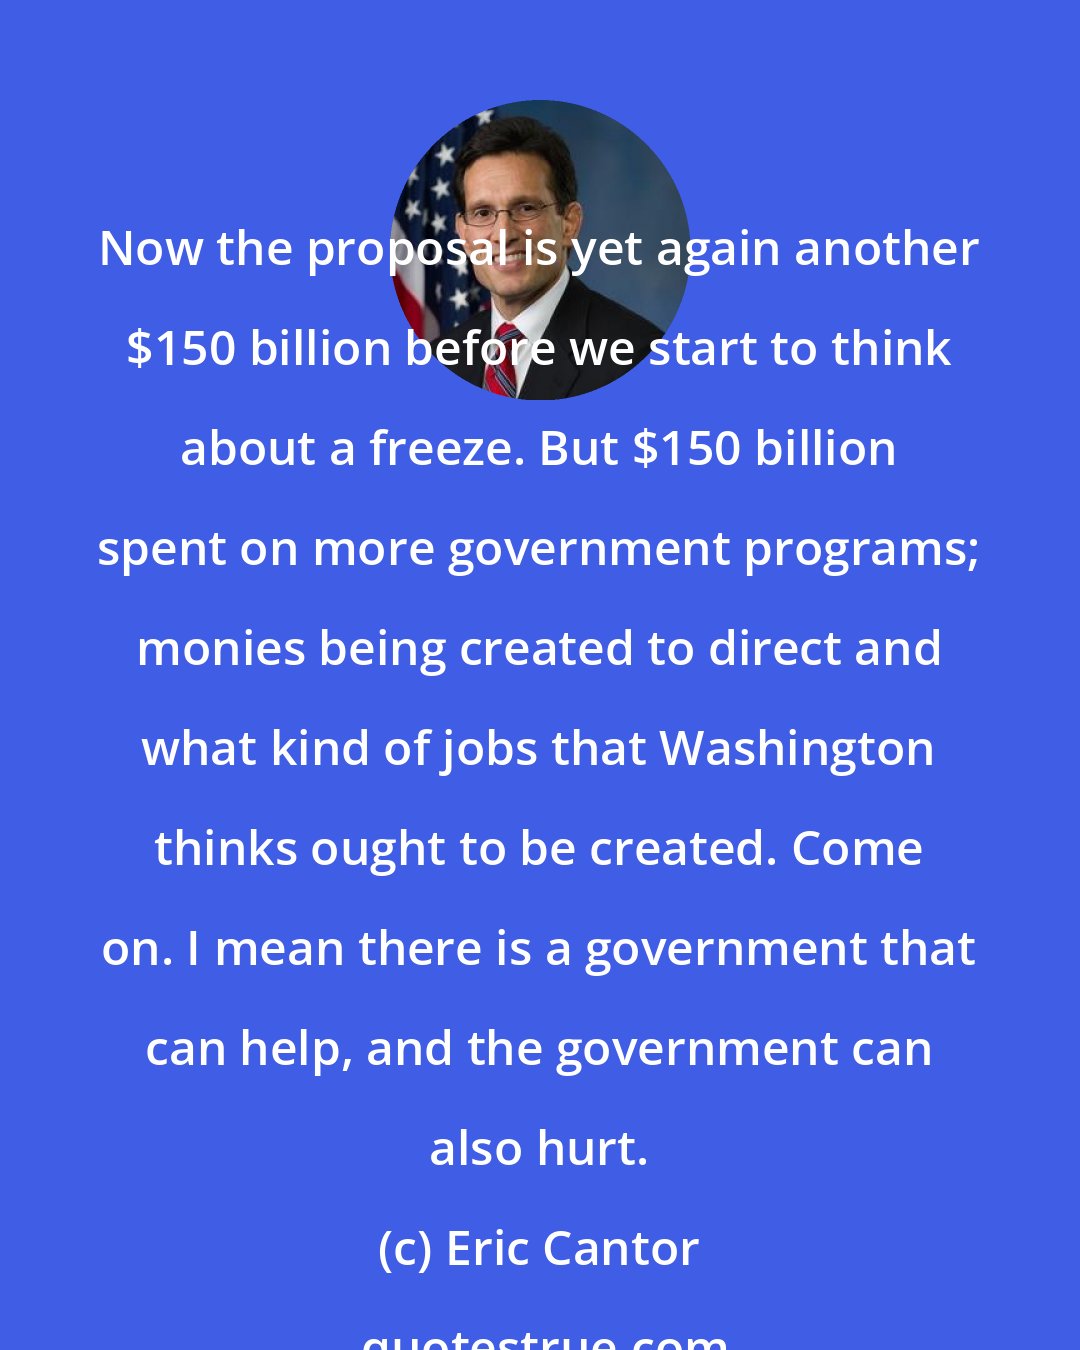 Eric Cantor: Now the proposal is yet again another $150 billion before we start to think about a freeze. But $150 billion spent on more government programs; monies being created to direct and what kind of jobs that Washington thinks ought to be created. Come on. I mean there is a government that can help, and the government can also hurt.